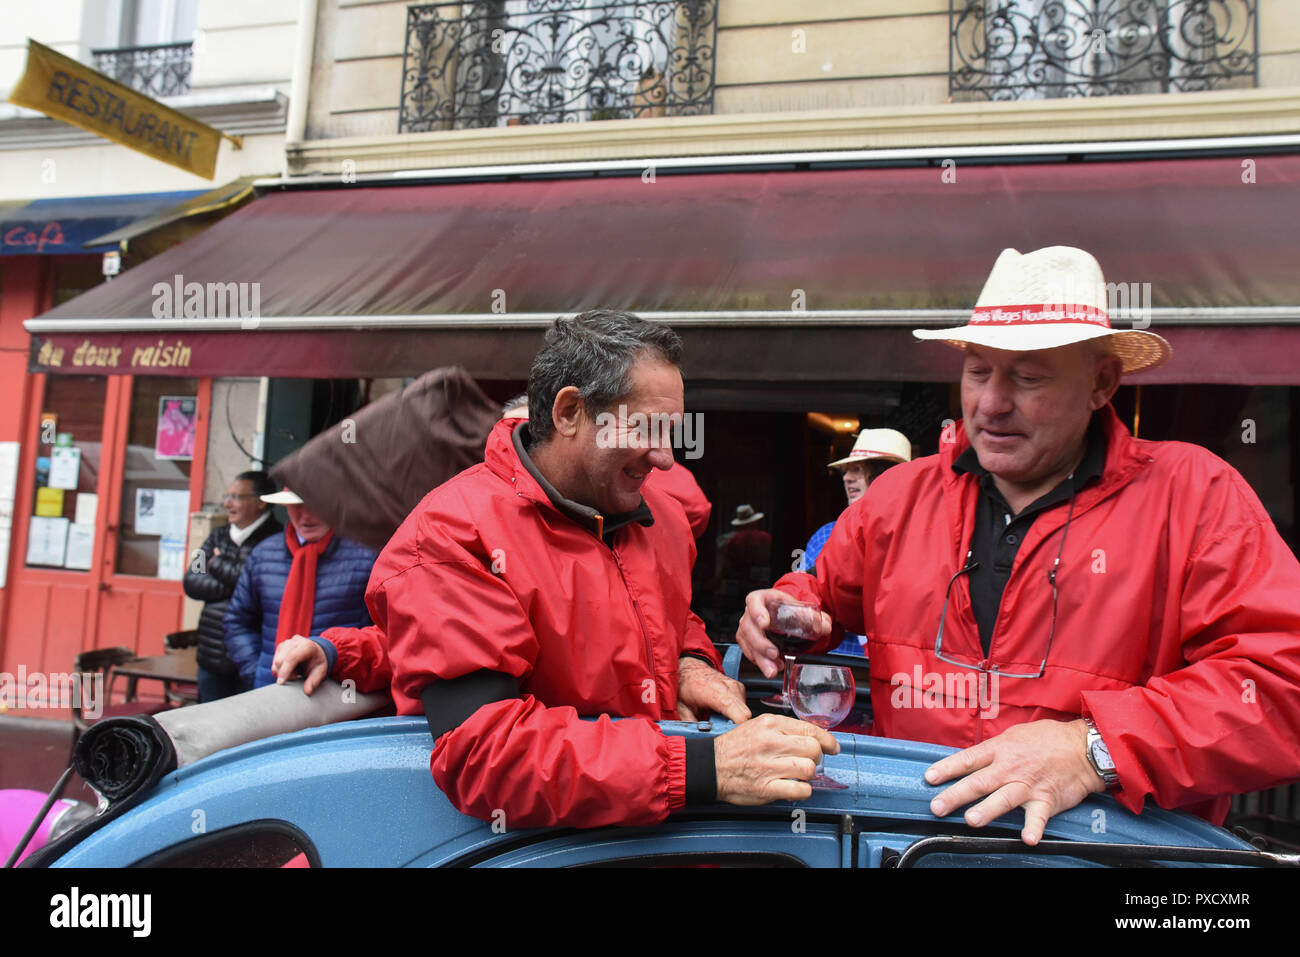 November 19, 2015 - Paris, France: Parisians celebrate the arrival of Beaujolais nouveau, a young red wine whose annual release every third Thursday of November is greeted by widespread degustation. Despite the recent Paris terror attacks, the owner of the bar 'Au Doux Raisin', Charles Alban (red pants) said he wanted to carry on the tradition and celebrate. Wine makers wearing red jackets and black armbands joined the party. The celebration comes as French authorities announced the death of terrorist mastermind Abdelhamid Abaaoud.  Des Francais fetent l'arrivee du Beaujolais Nouveau quelques  Stock Photo